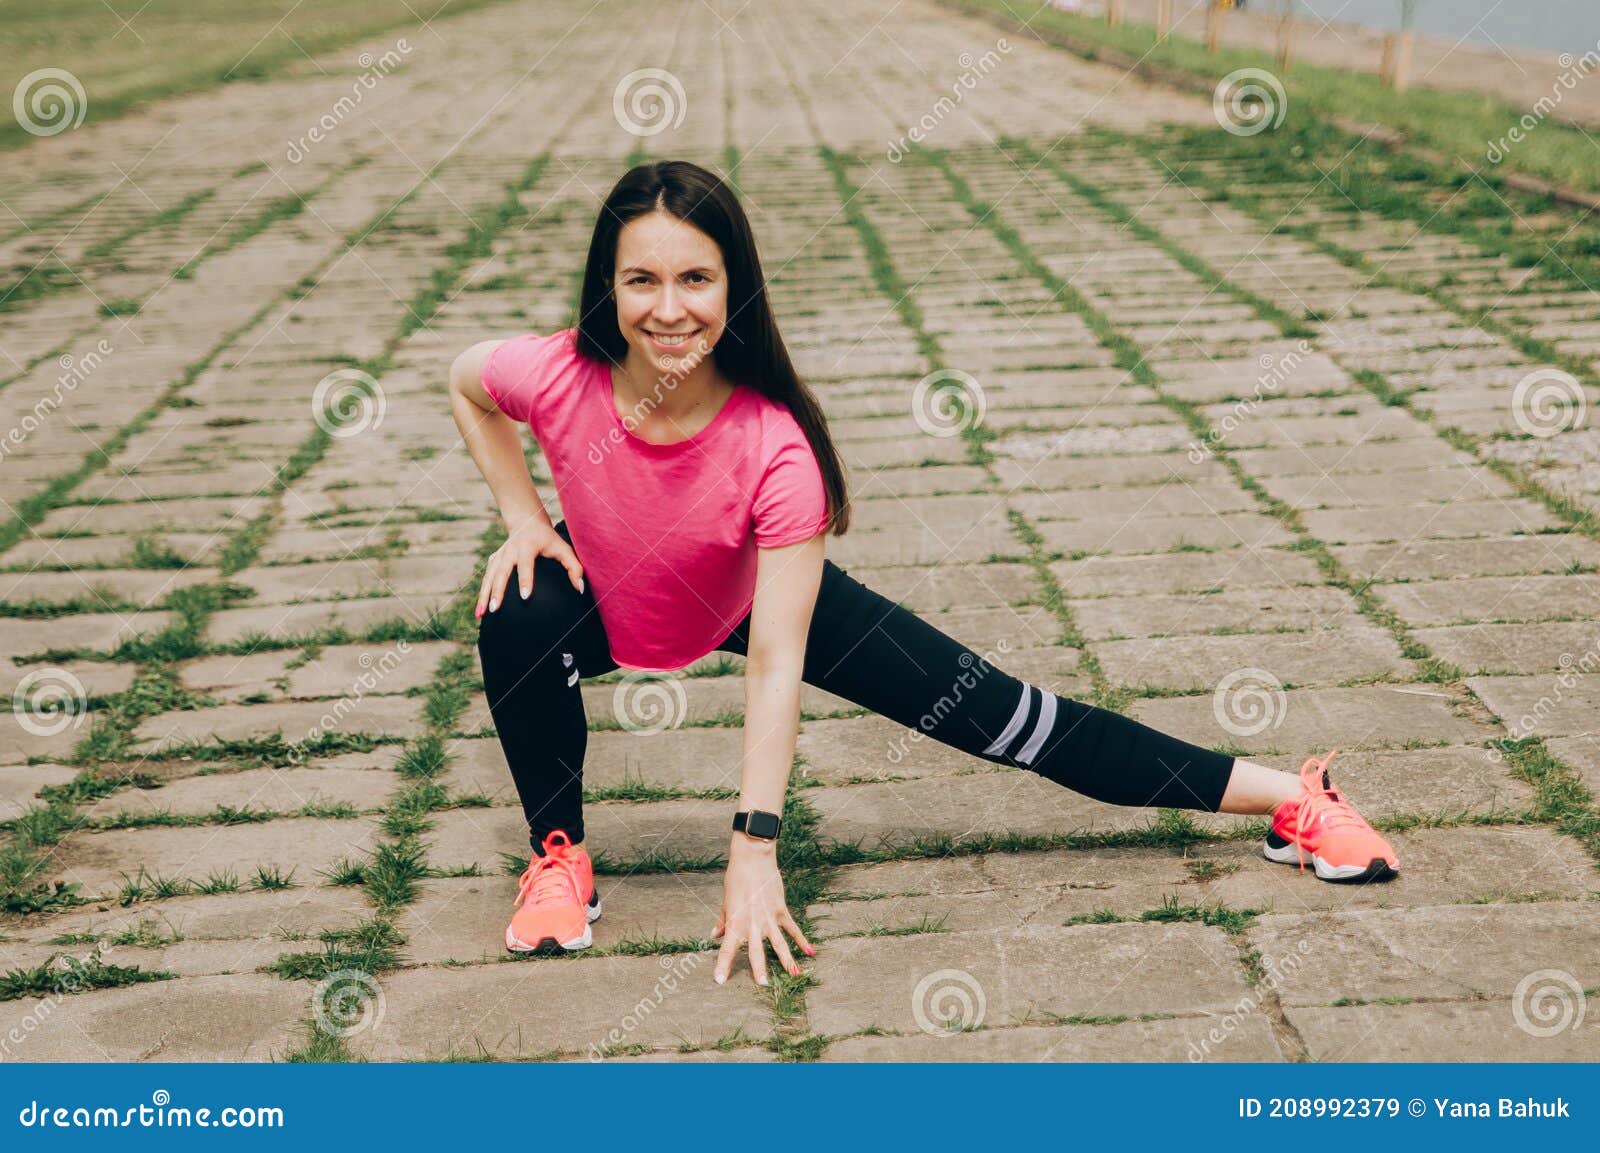 young brunette woman with bare feet  wearing black and purple fitness outfit  stretching on violet yoga mat outside on wooden pier